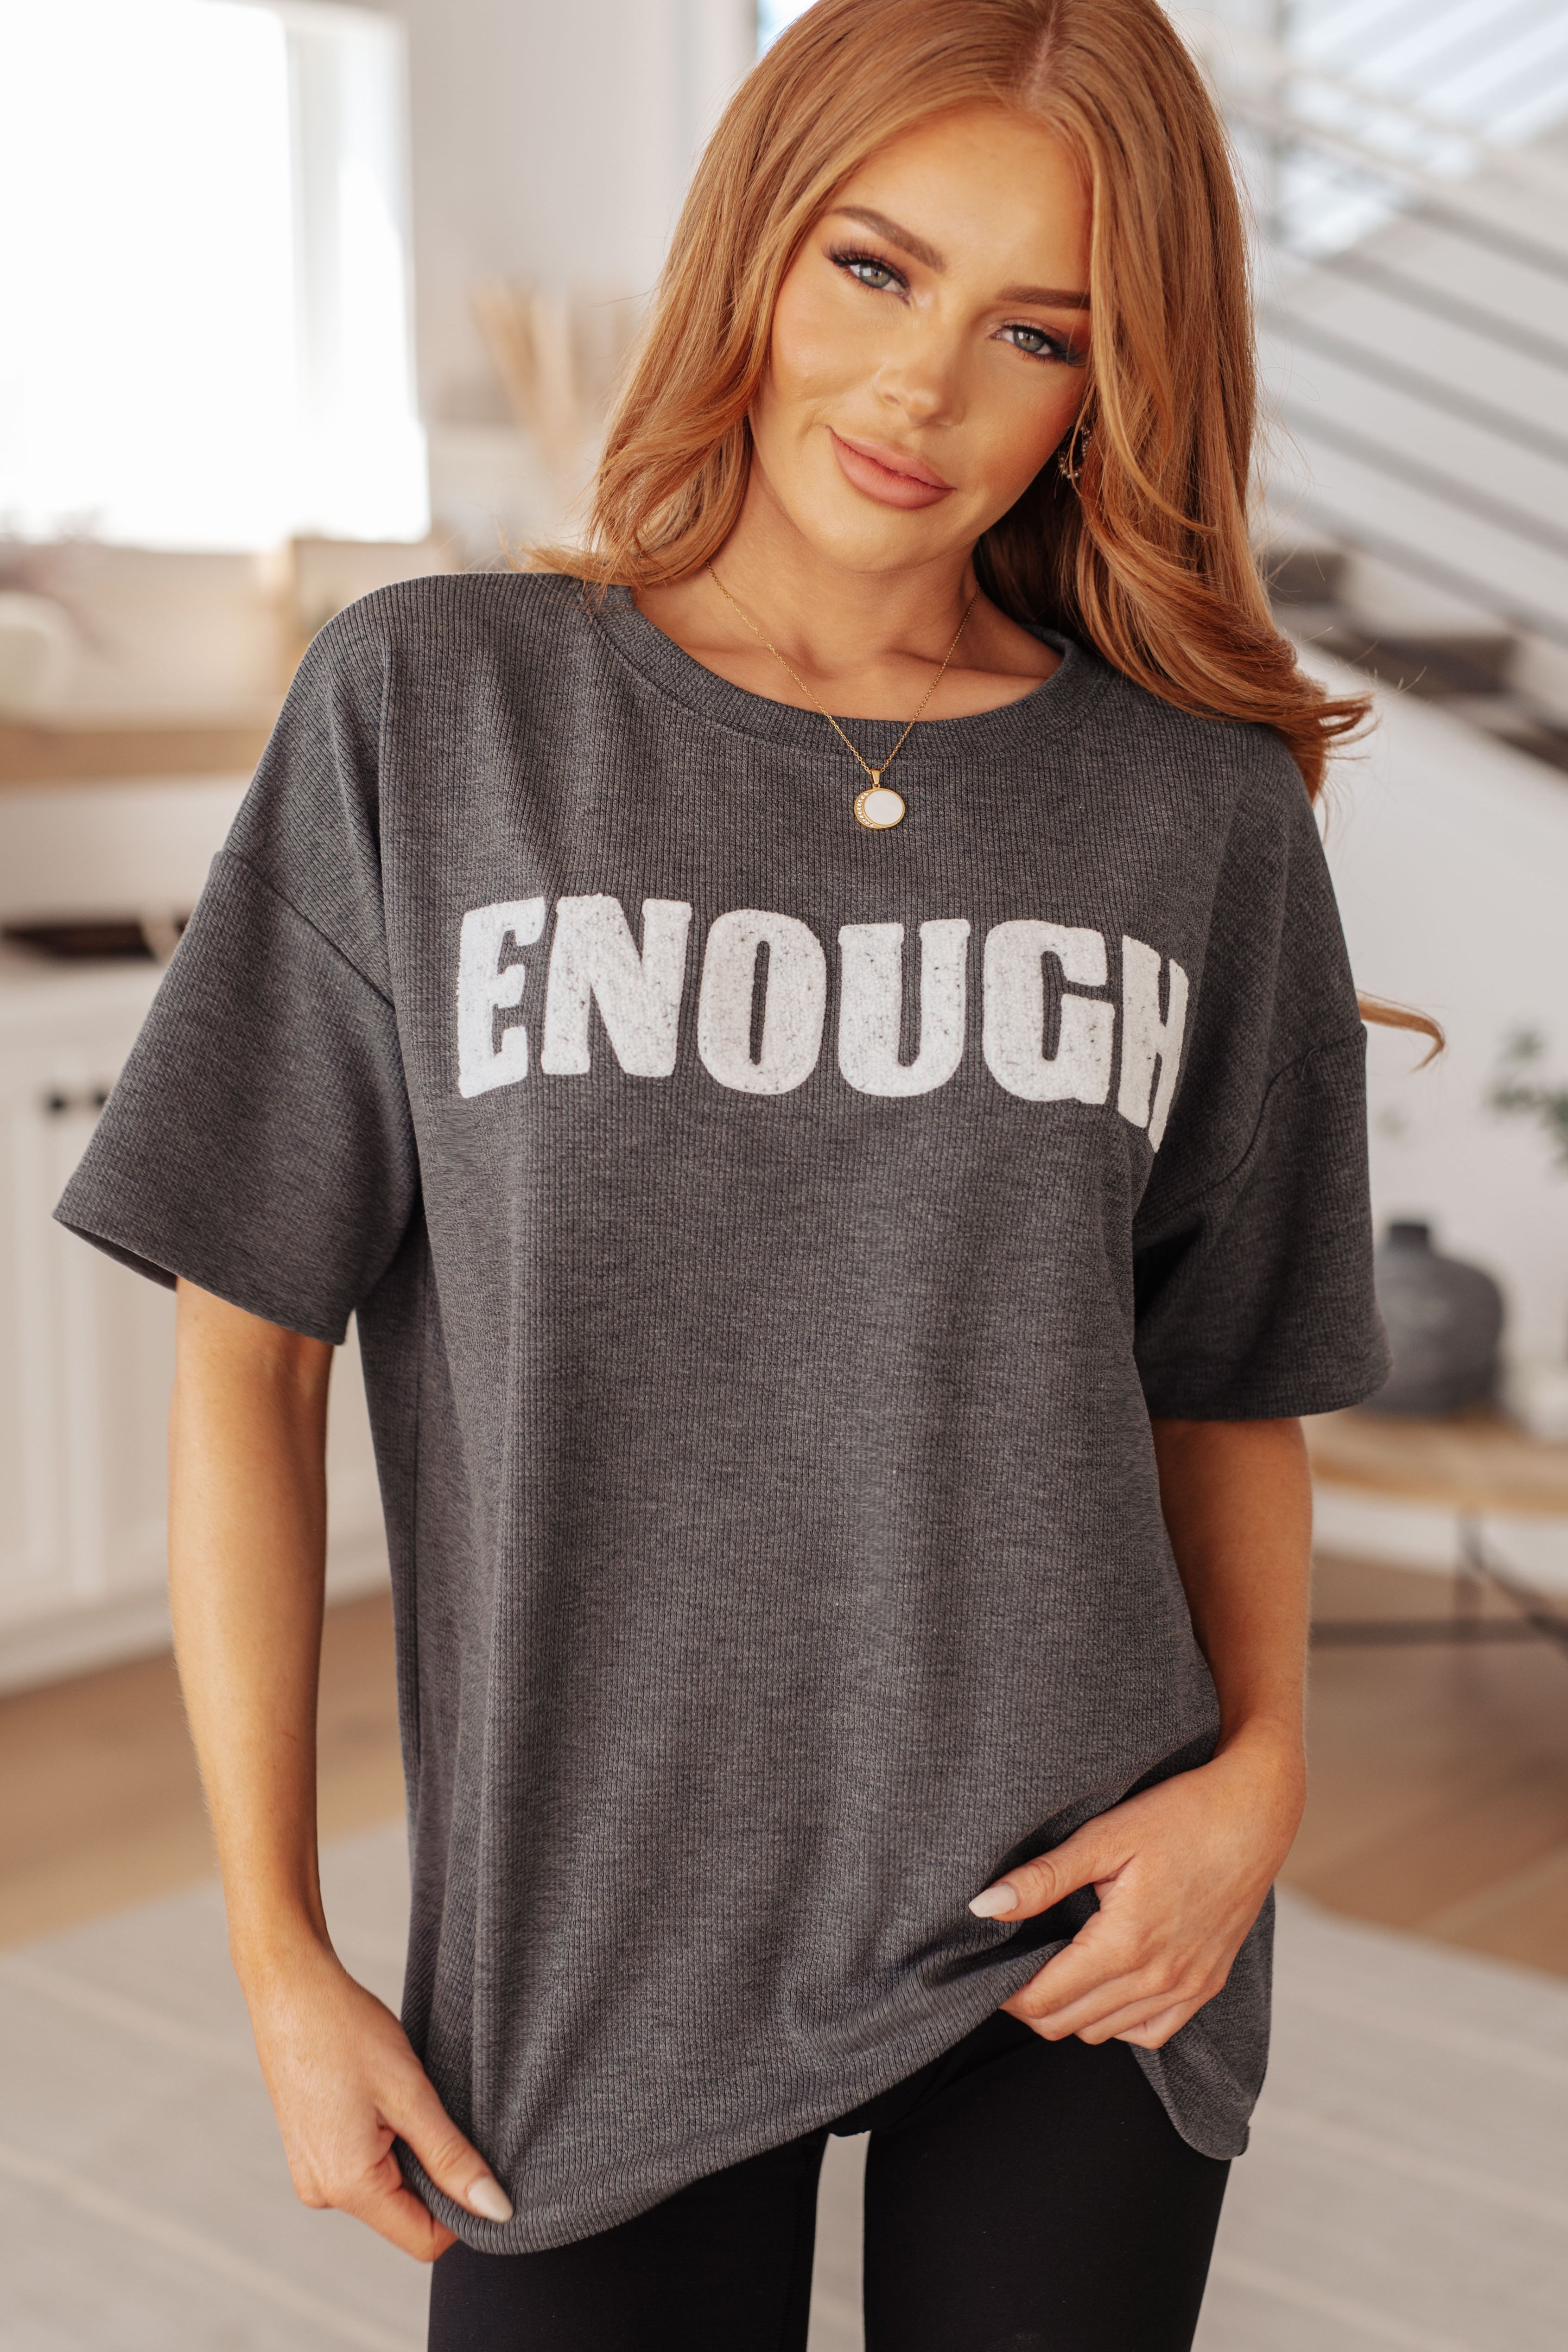 Always Enough Graphic Tee • Charcoal